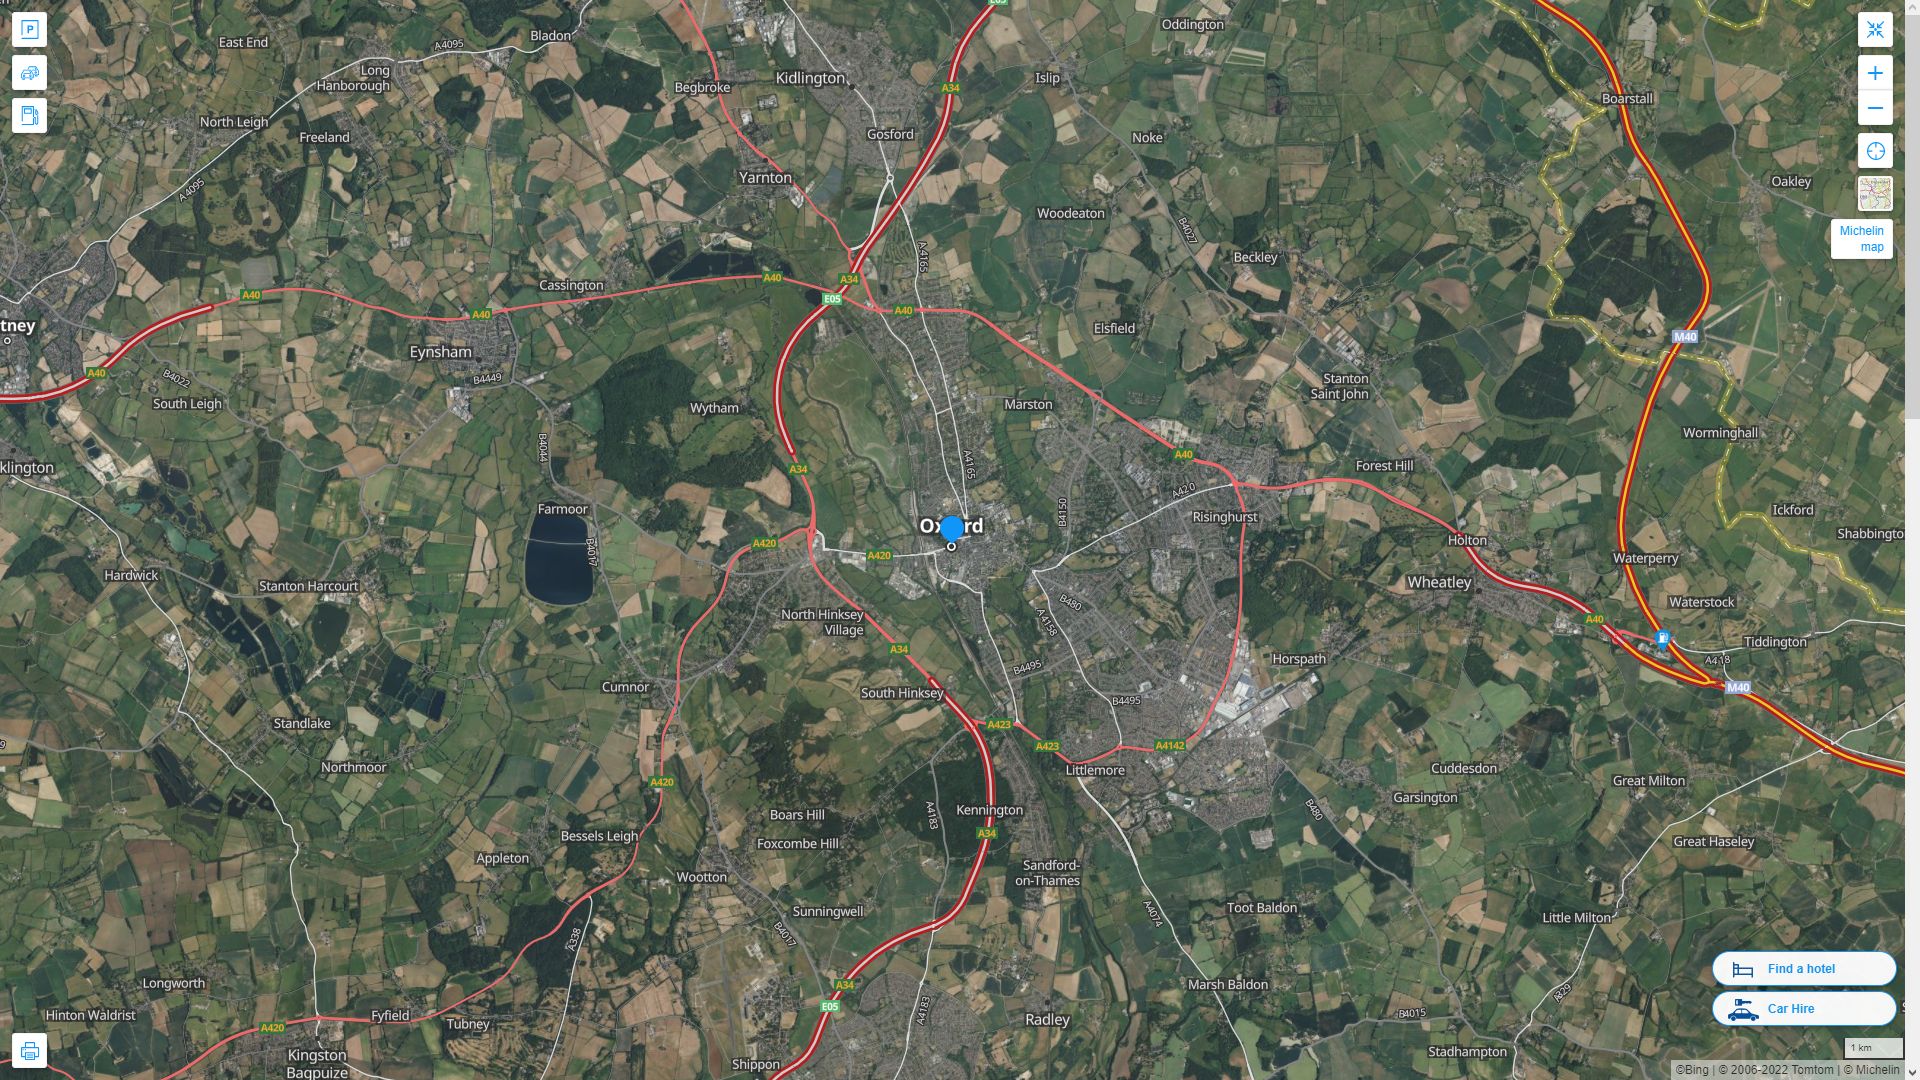 Oxford Highway and Road Map with Satellite View